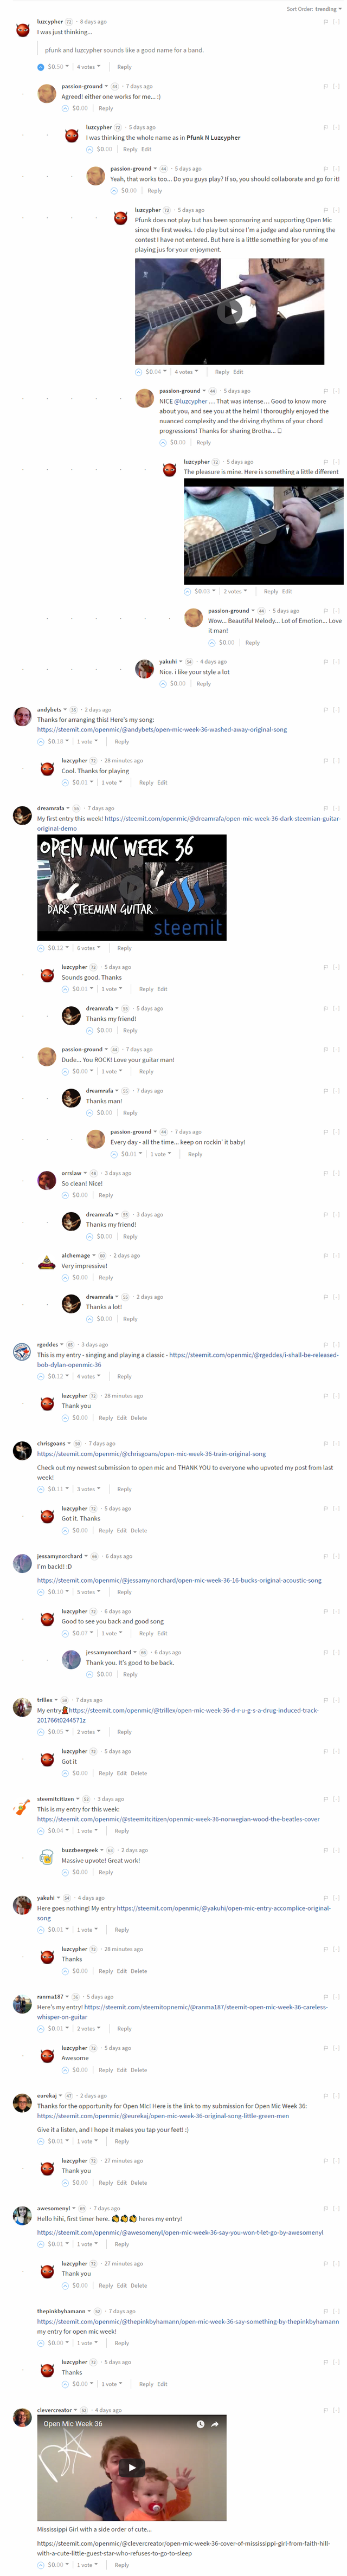 open mic 36 comments.png